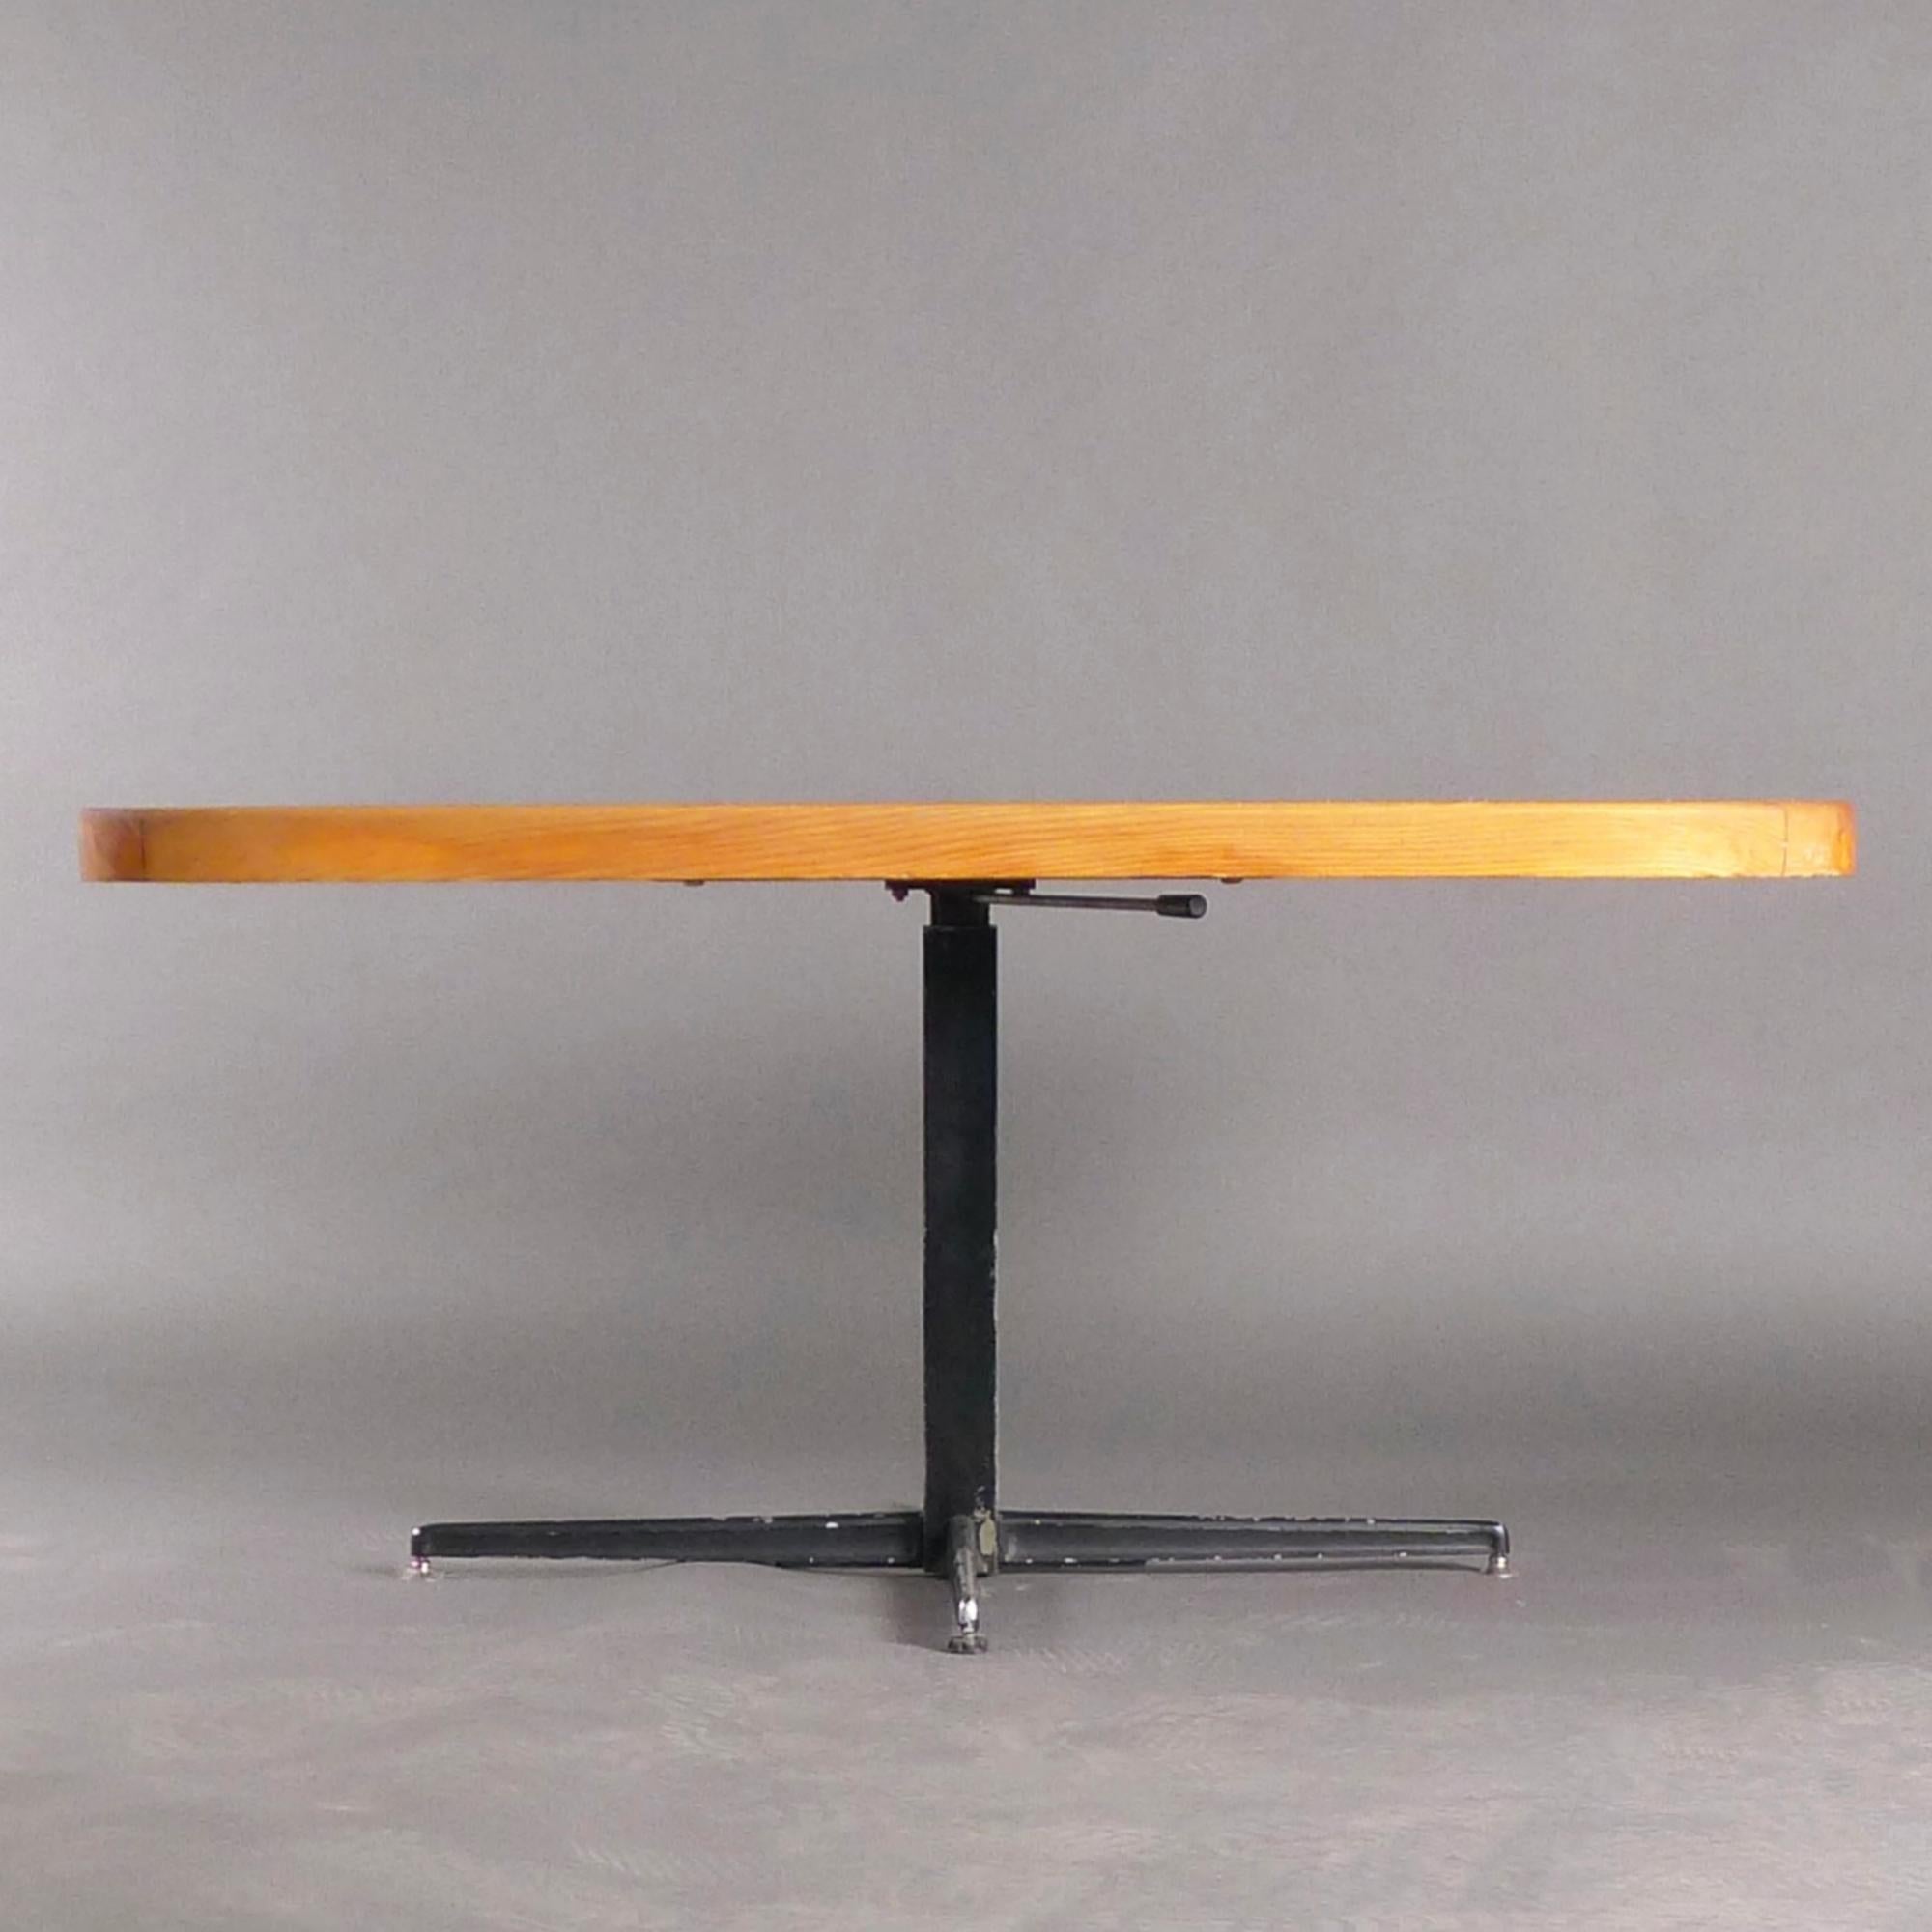 A rare adjustable dining / coffee table, designed by Charlotte Perriand for use in the series of ski resorts she worked on in Les Arcs, France, during the 1960s-70s.

The rounded corners of the planked pine top were designed to prevent injury in the